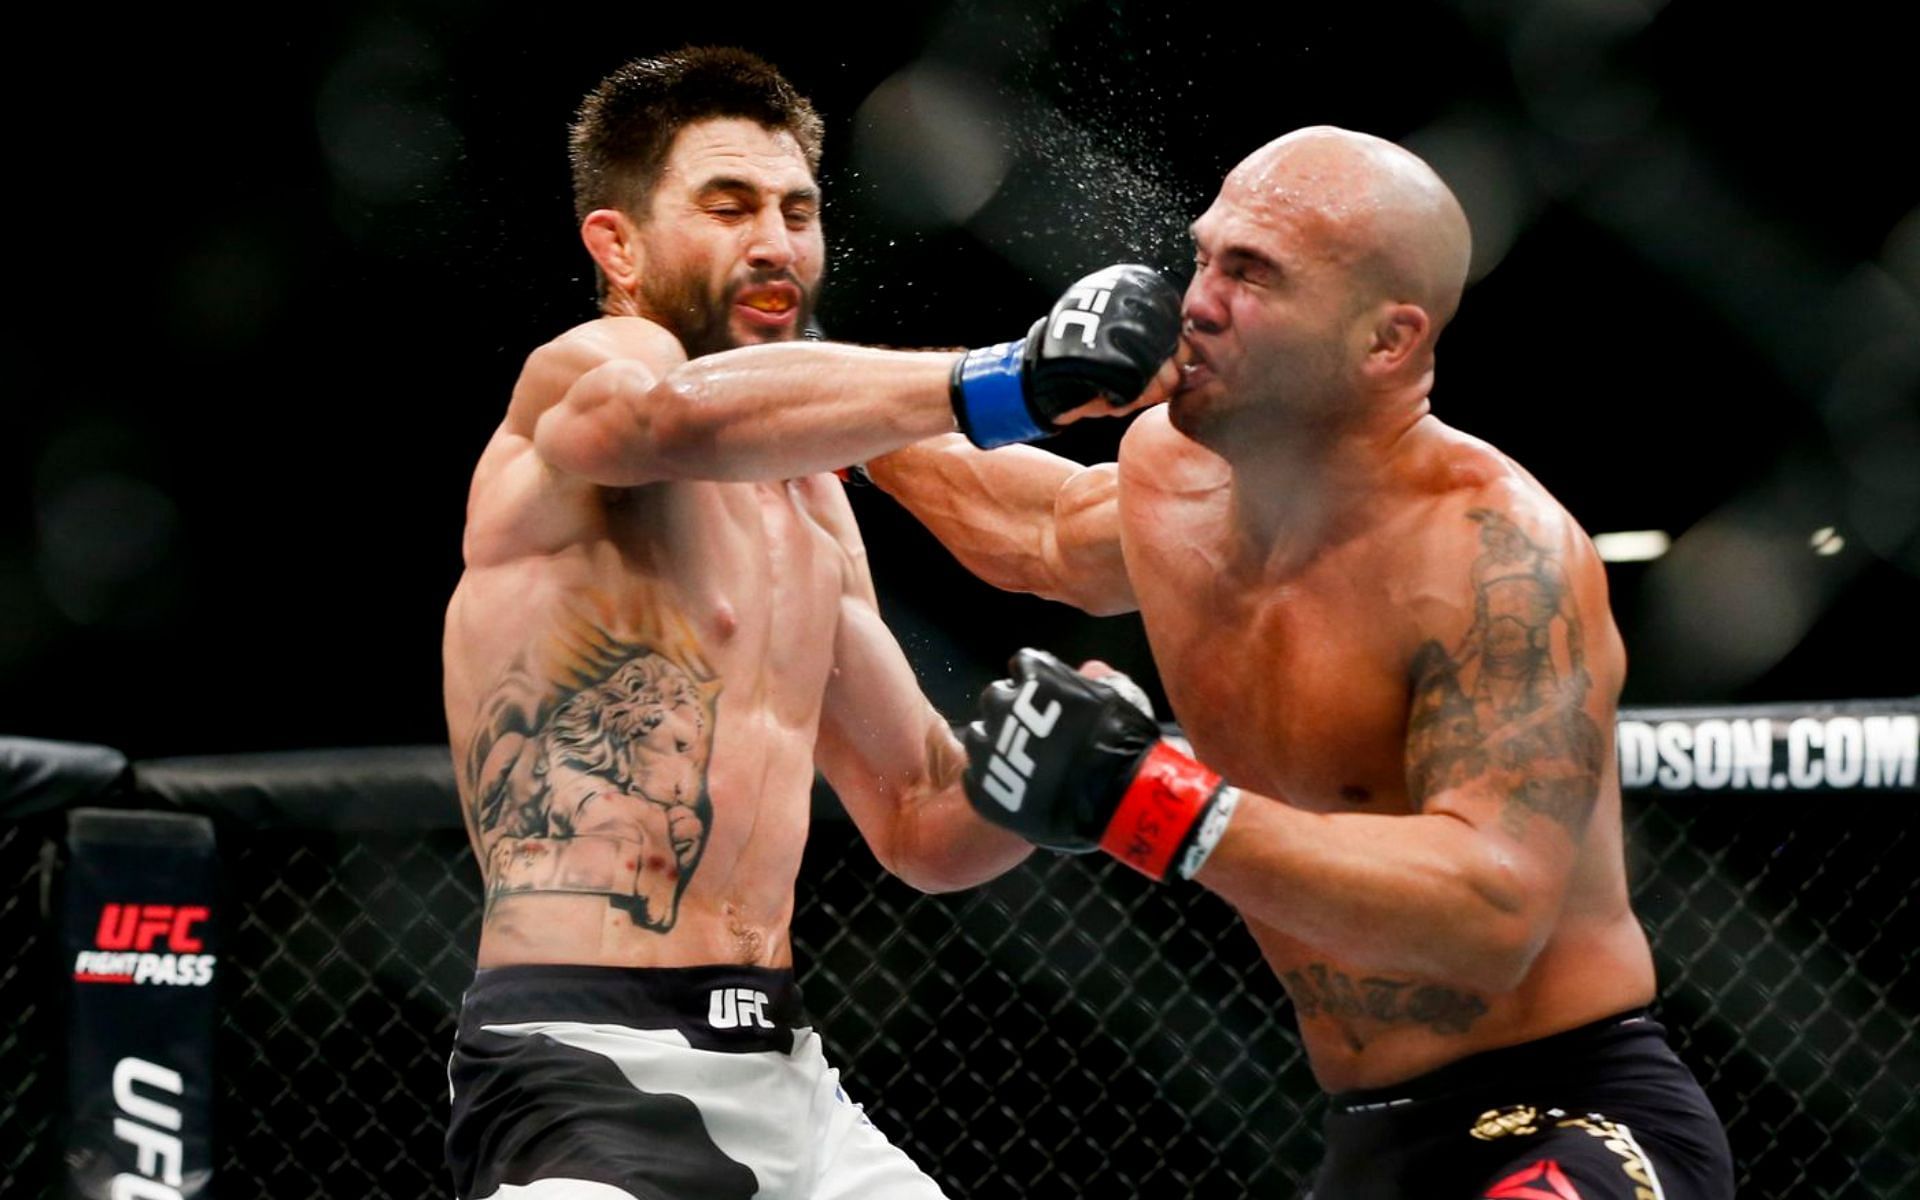 Robbie Lawler and Carlos Condit put on an instant classic to start 2016 off with a bang